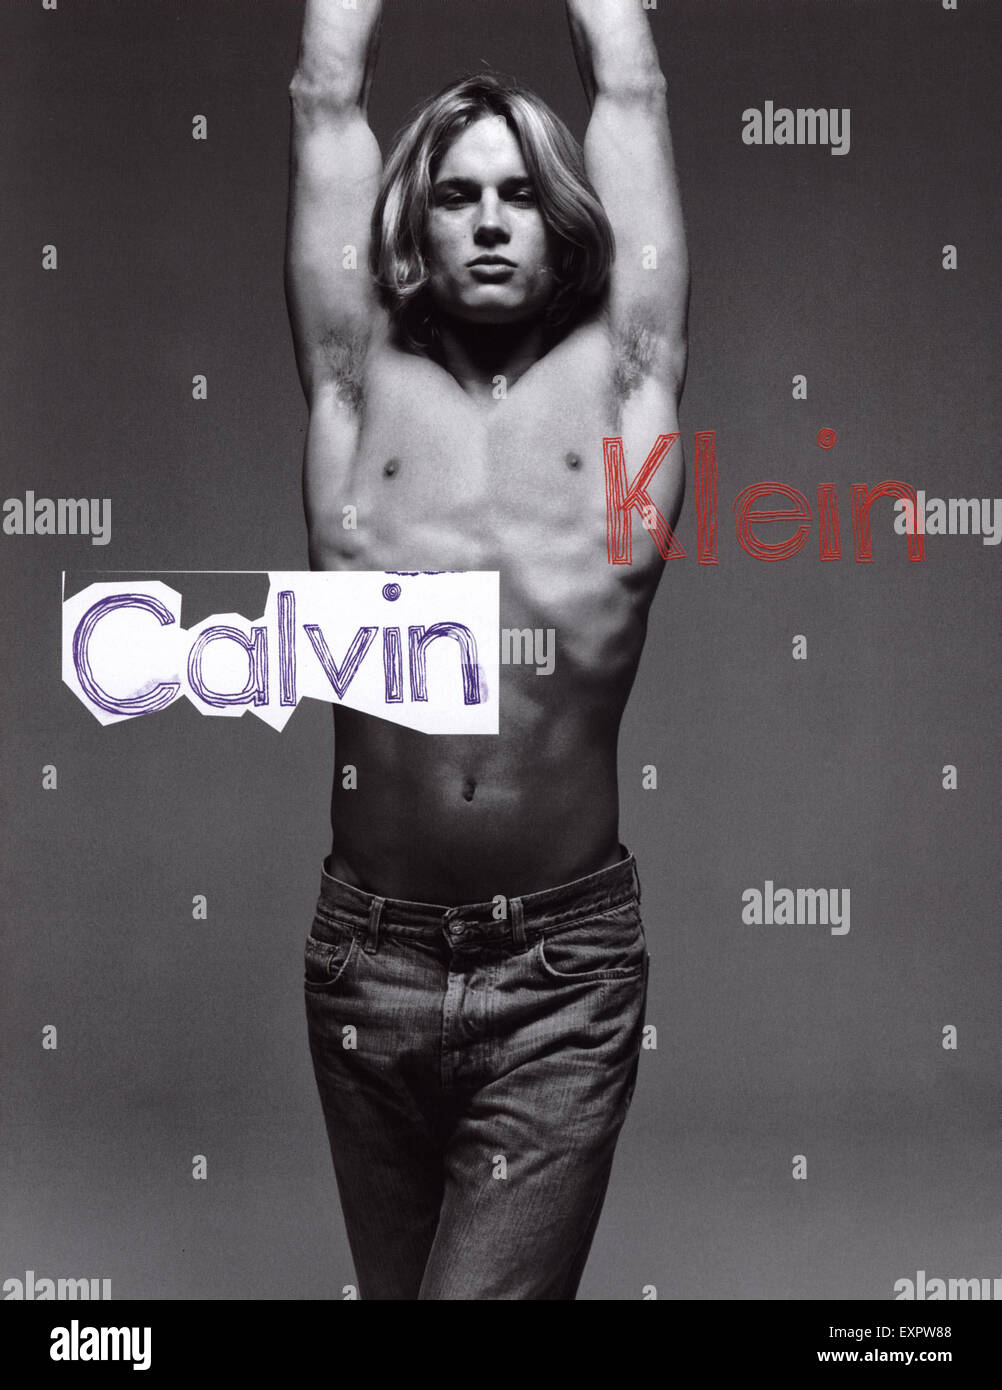 Calvin Klein Jeans Advert High Resolution Stock Photography and Images -  Alamy